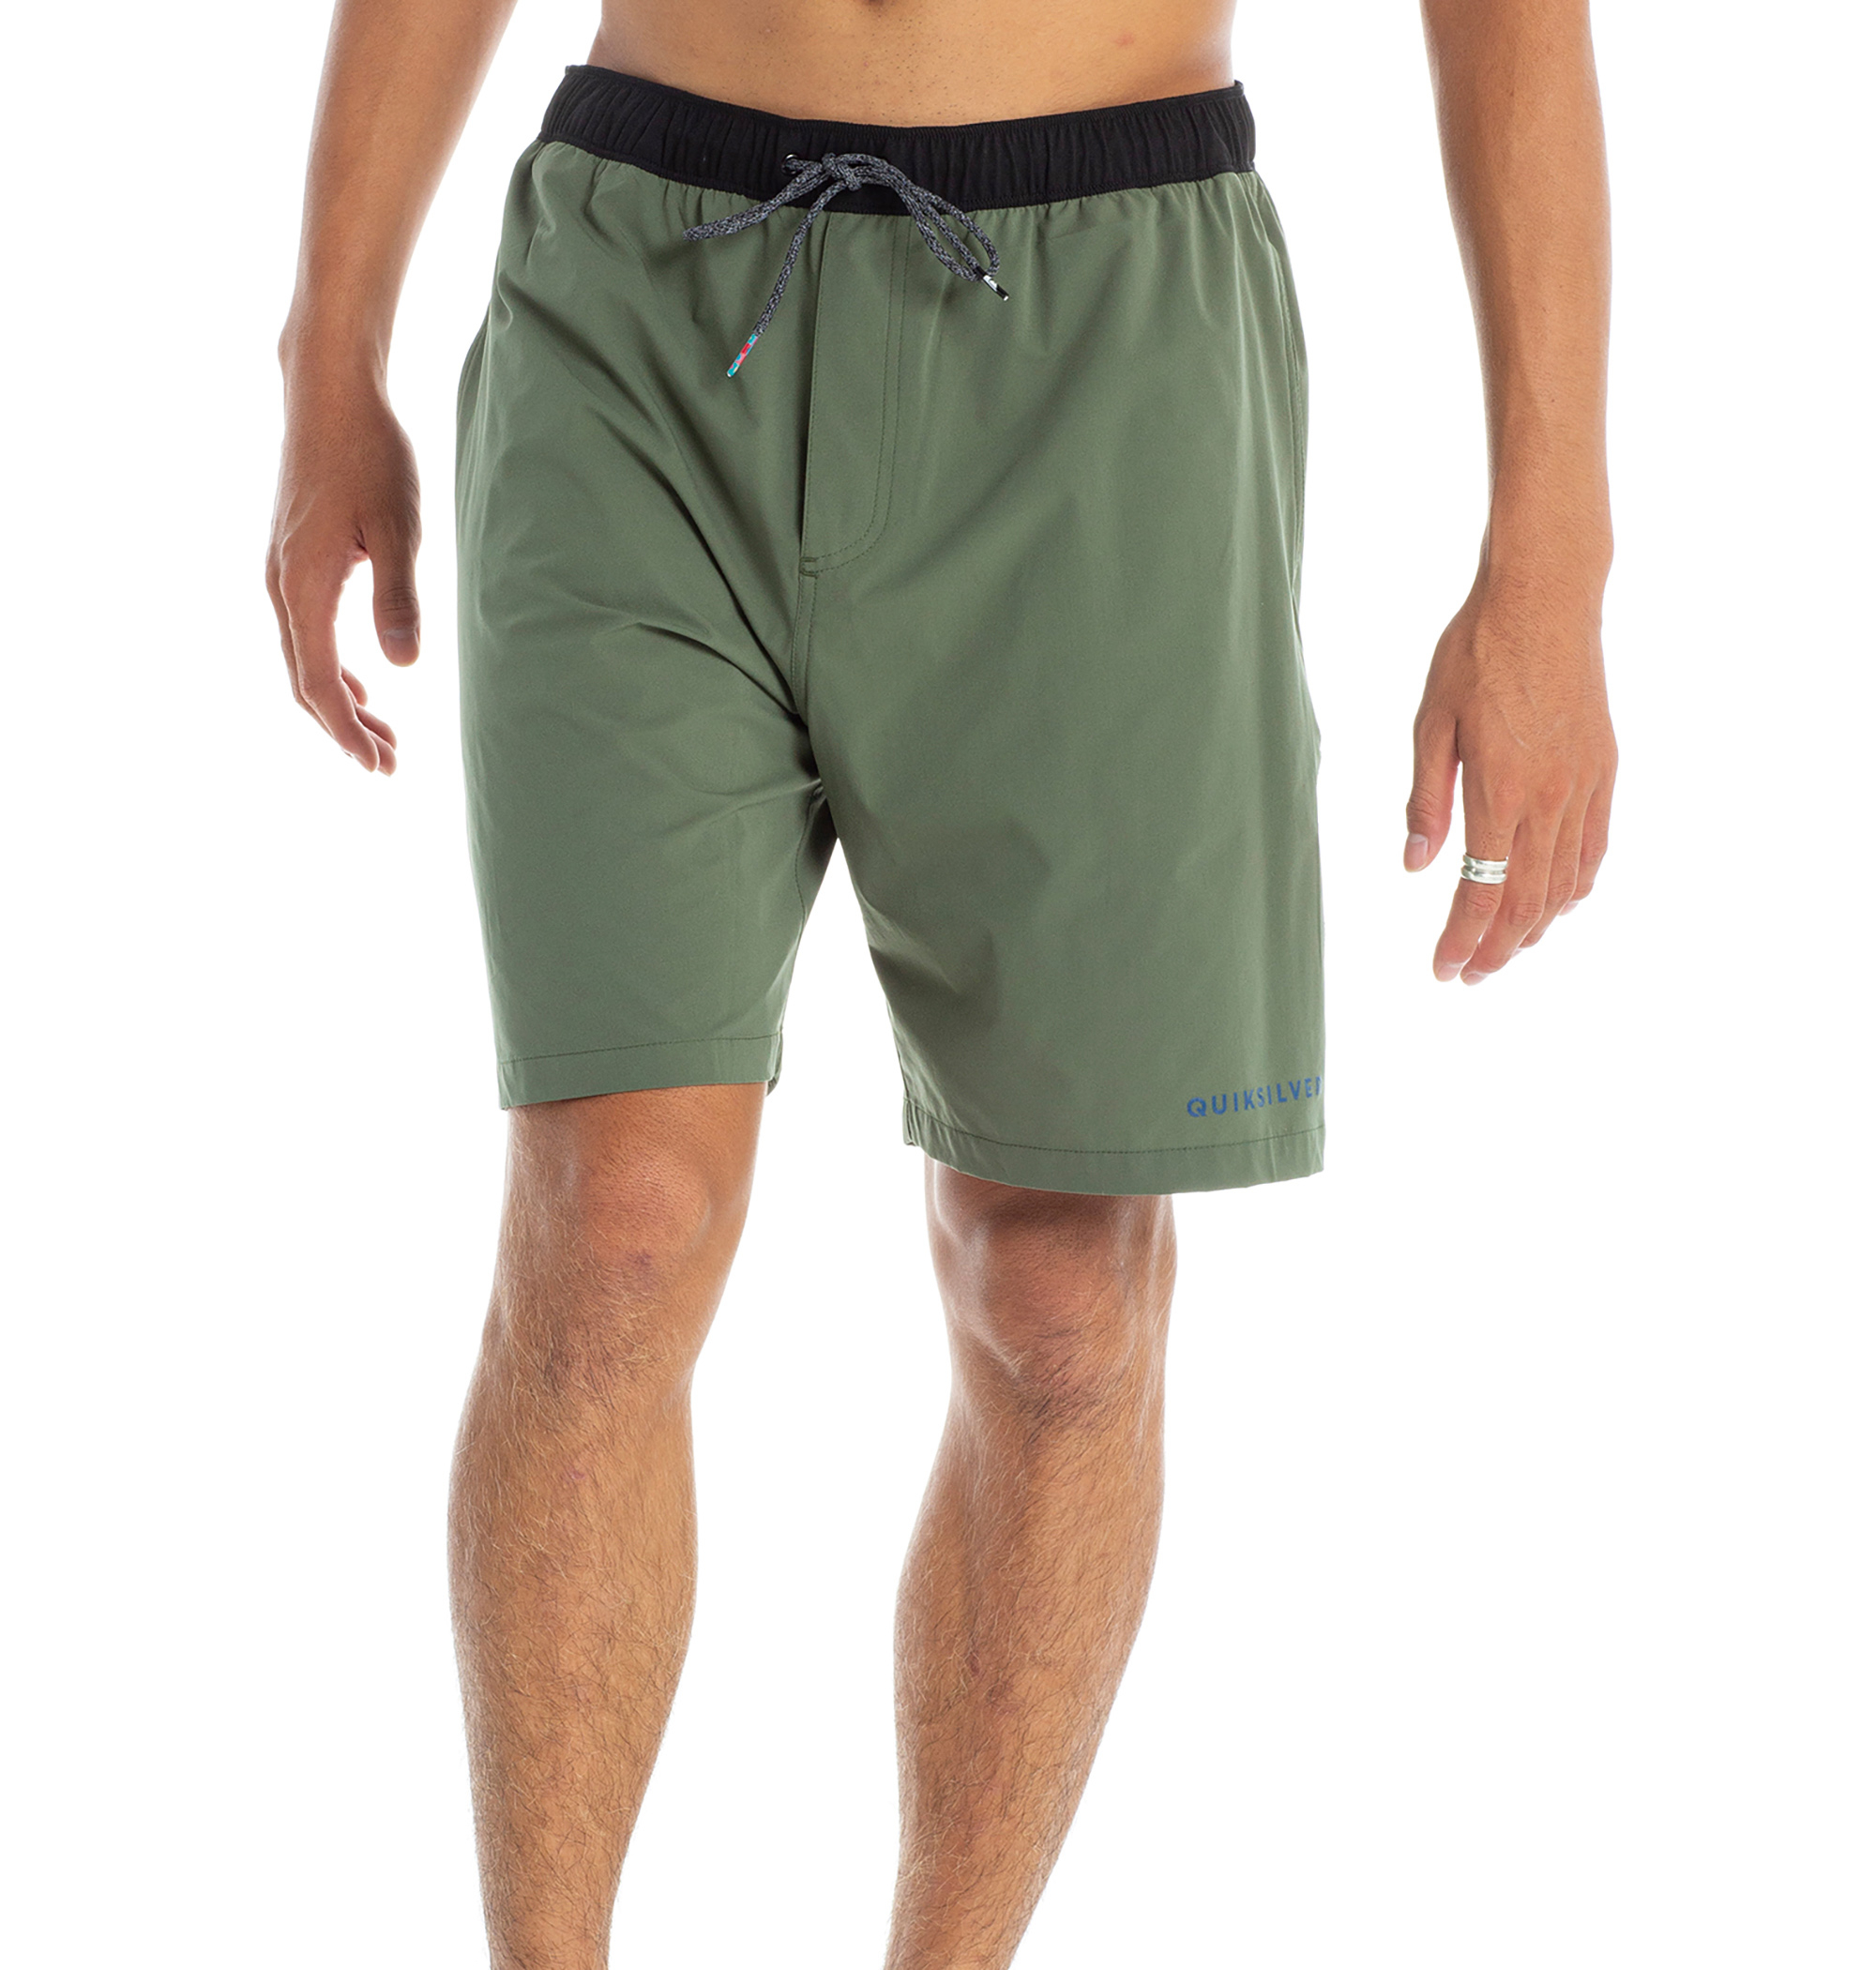 20%OFF！＜Quiksilver＞ UTILITY POCKET SHORTS Lengthは19インチ